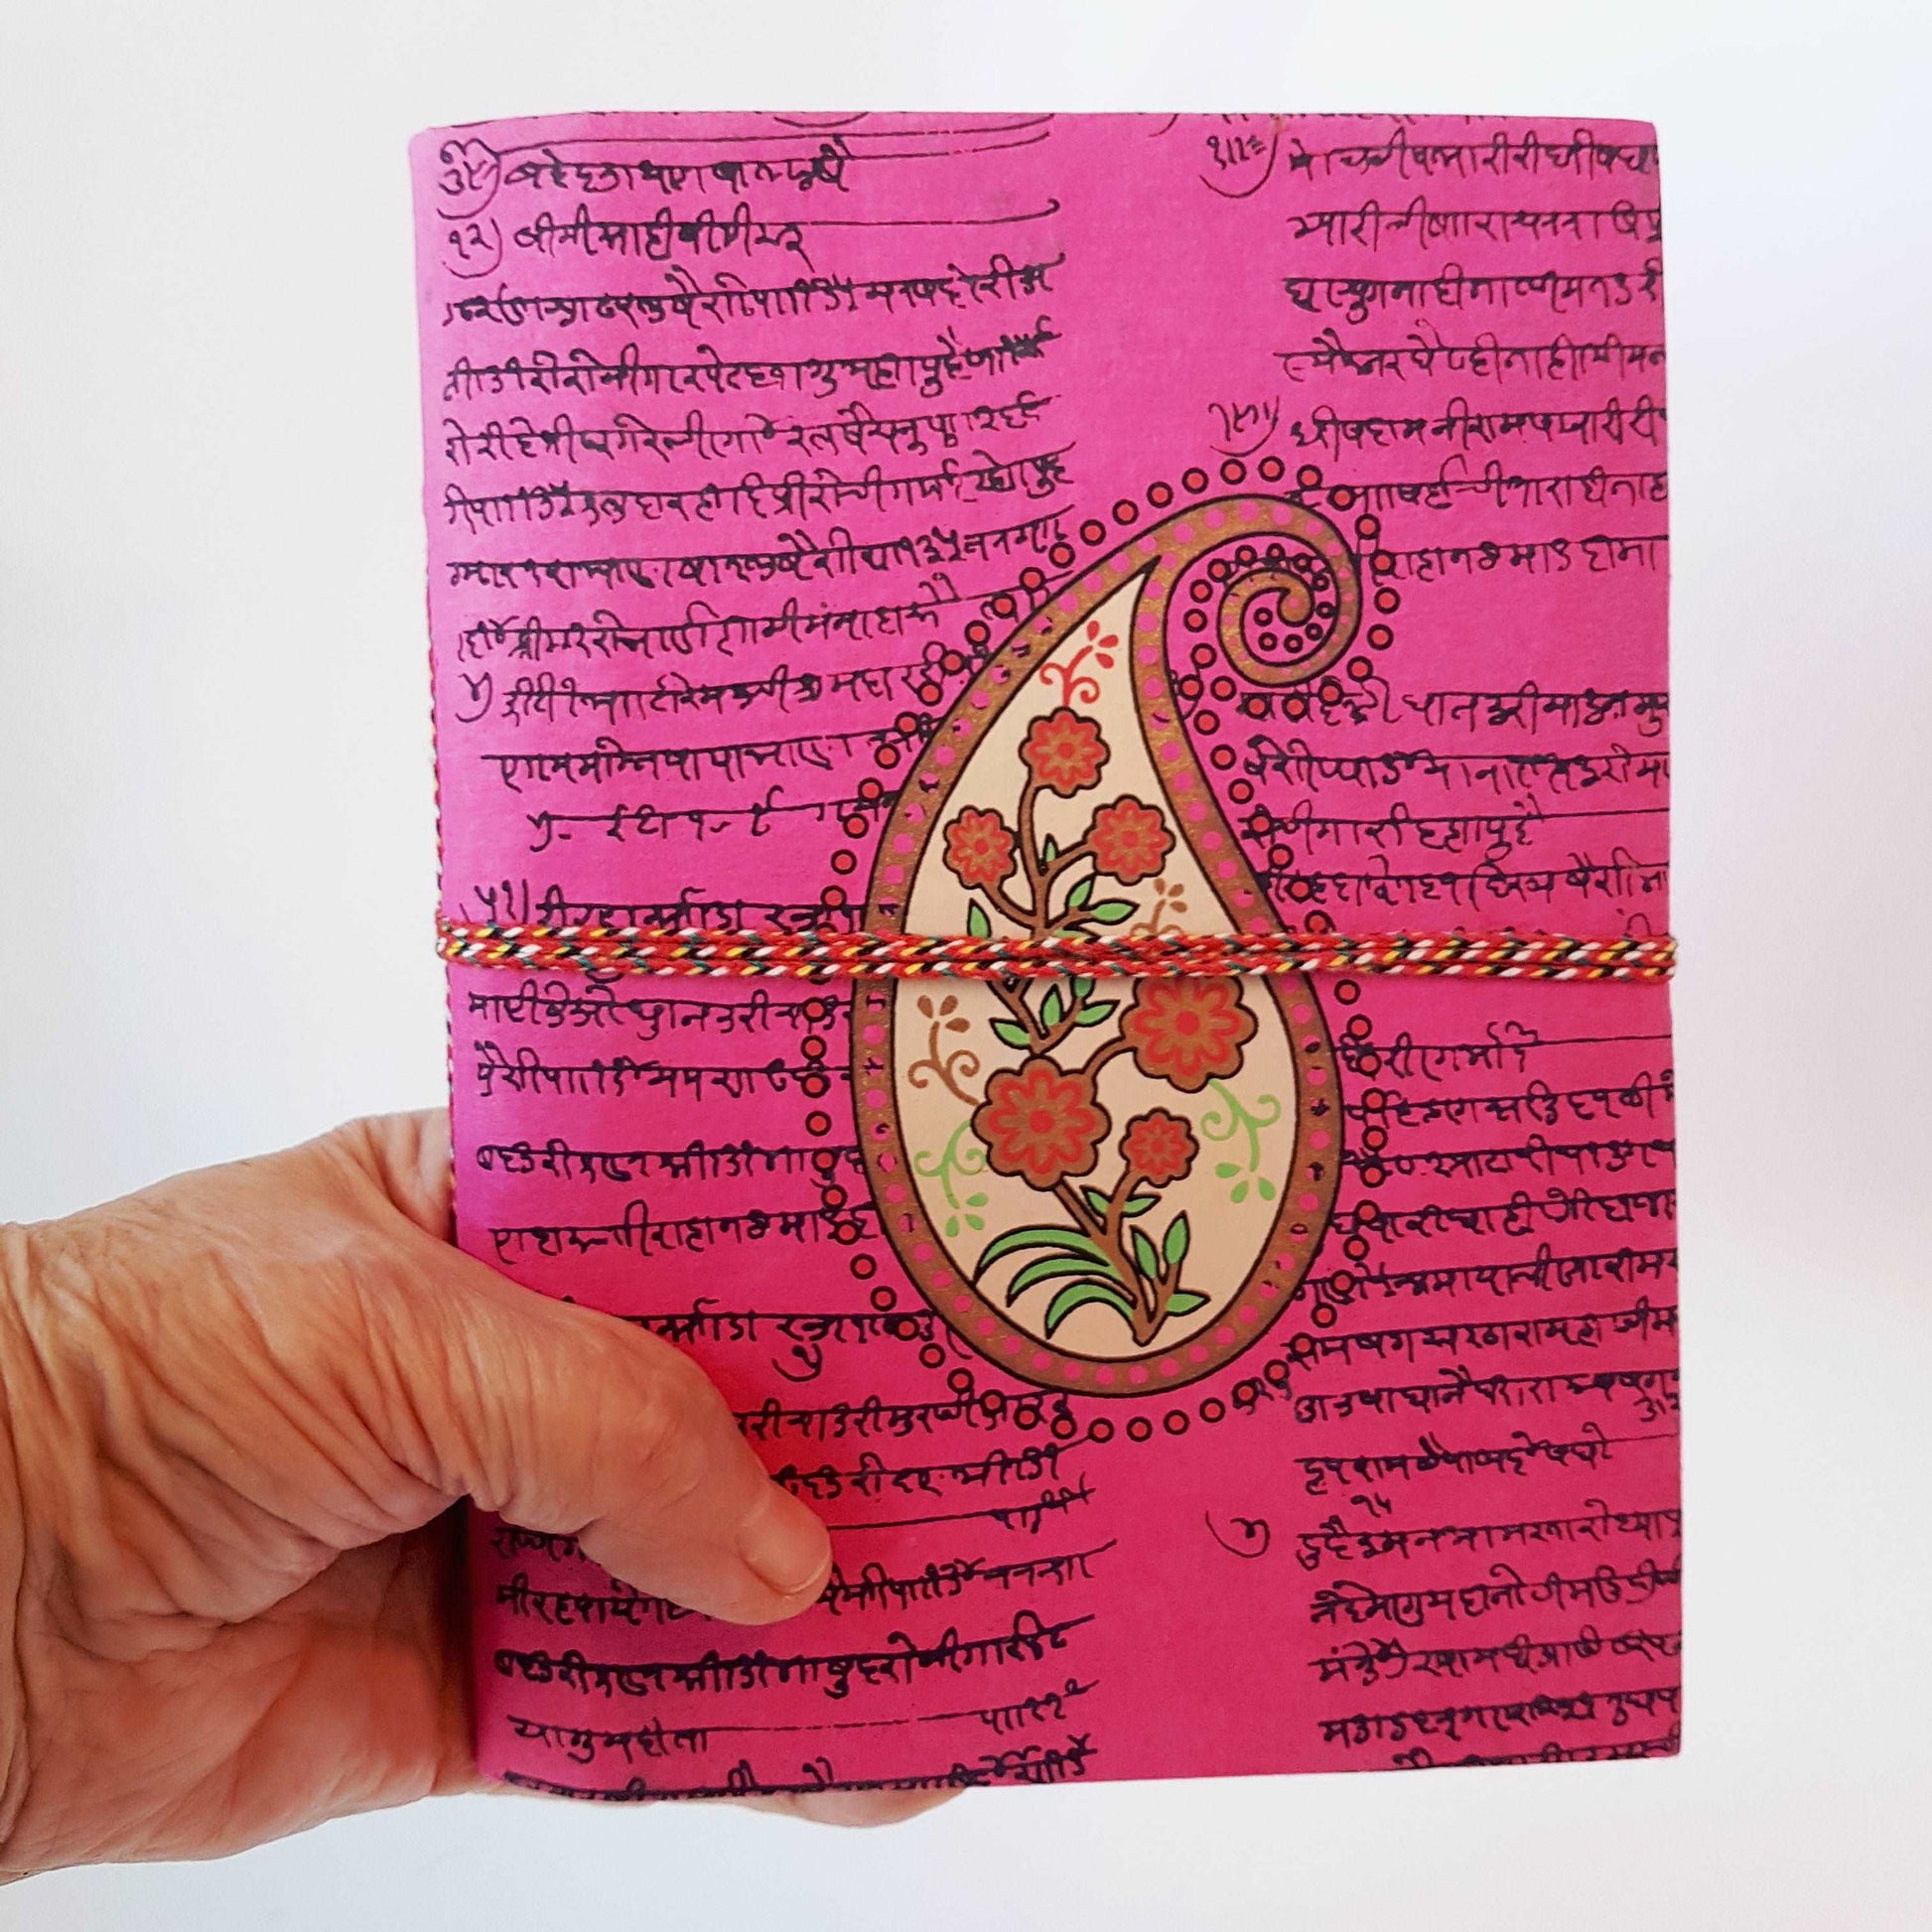 Blank notebook with fushia pink floral paisley design cover 6x8 inch. Use as sketchbook, bullet journal, diary. Premium handmade paper.